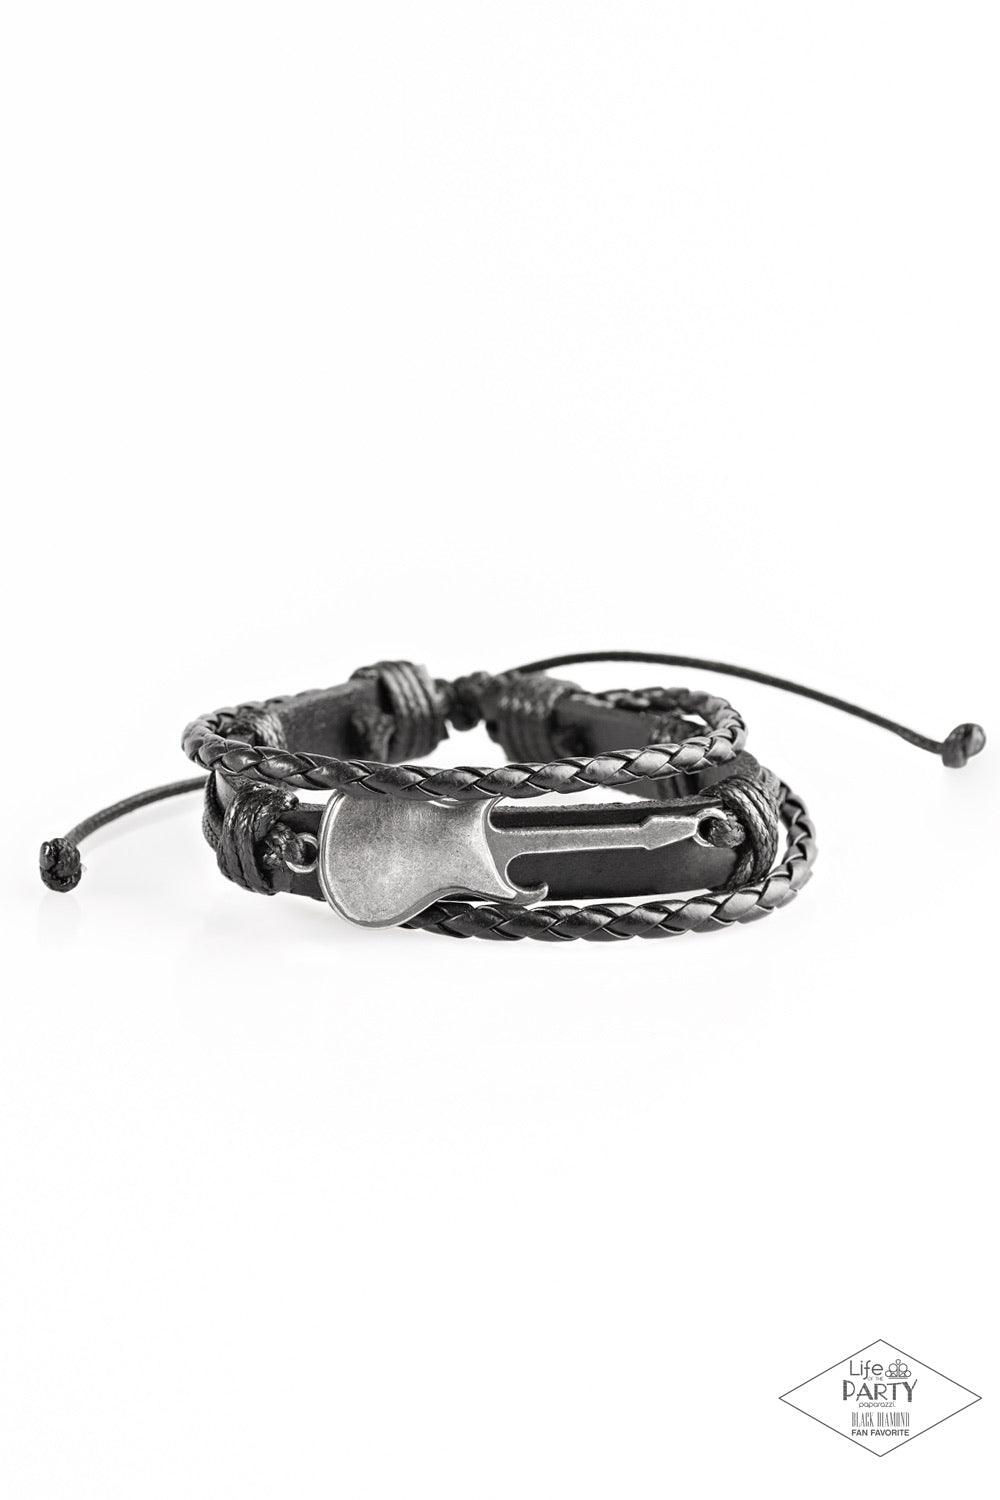 Paparazzi Accessories Lead Guitar - Black Two strands of braided leather cording join a rustic black leather band around the wrist. Shiny black cording wraps around a metallic guitar charm, knotting the centerpiece in place for an urban finish. Features a